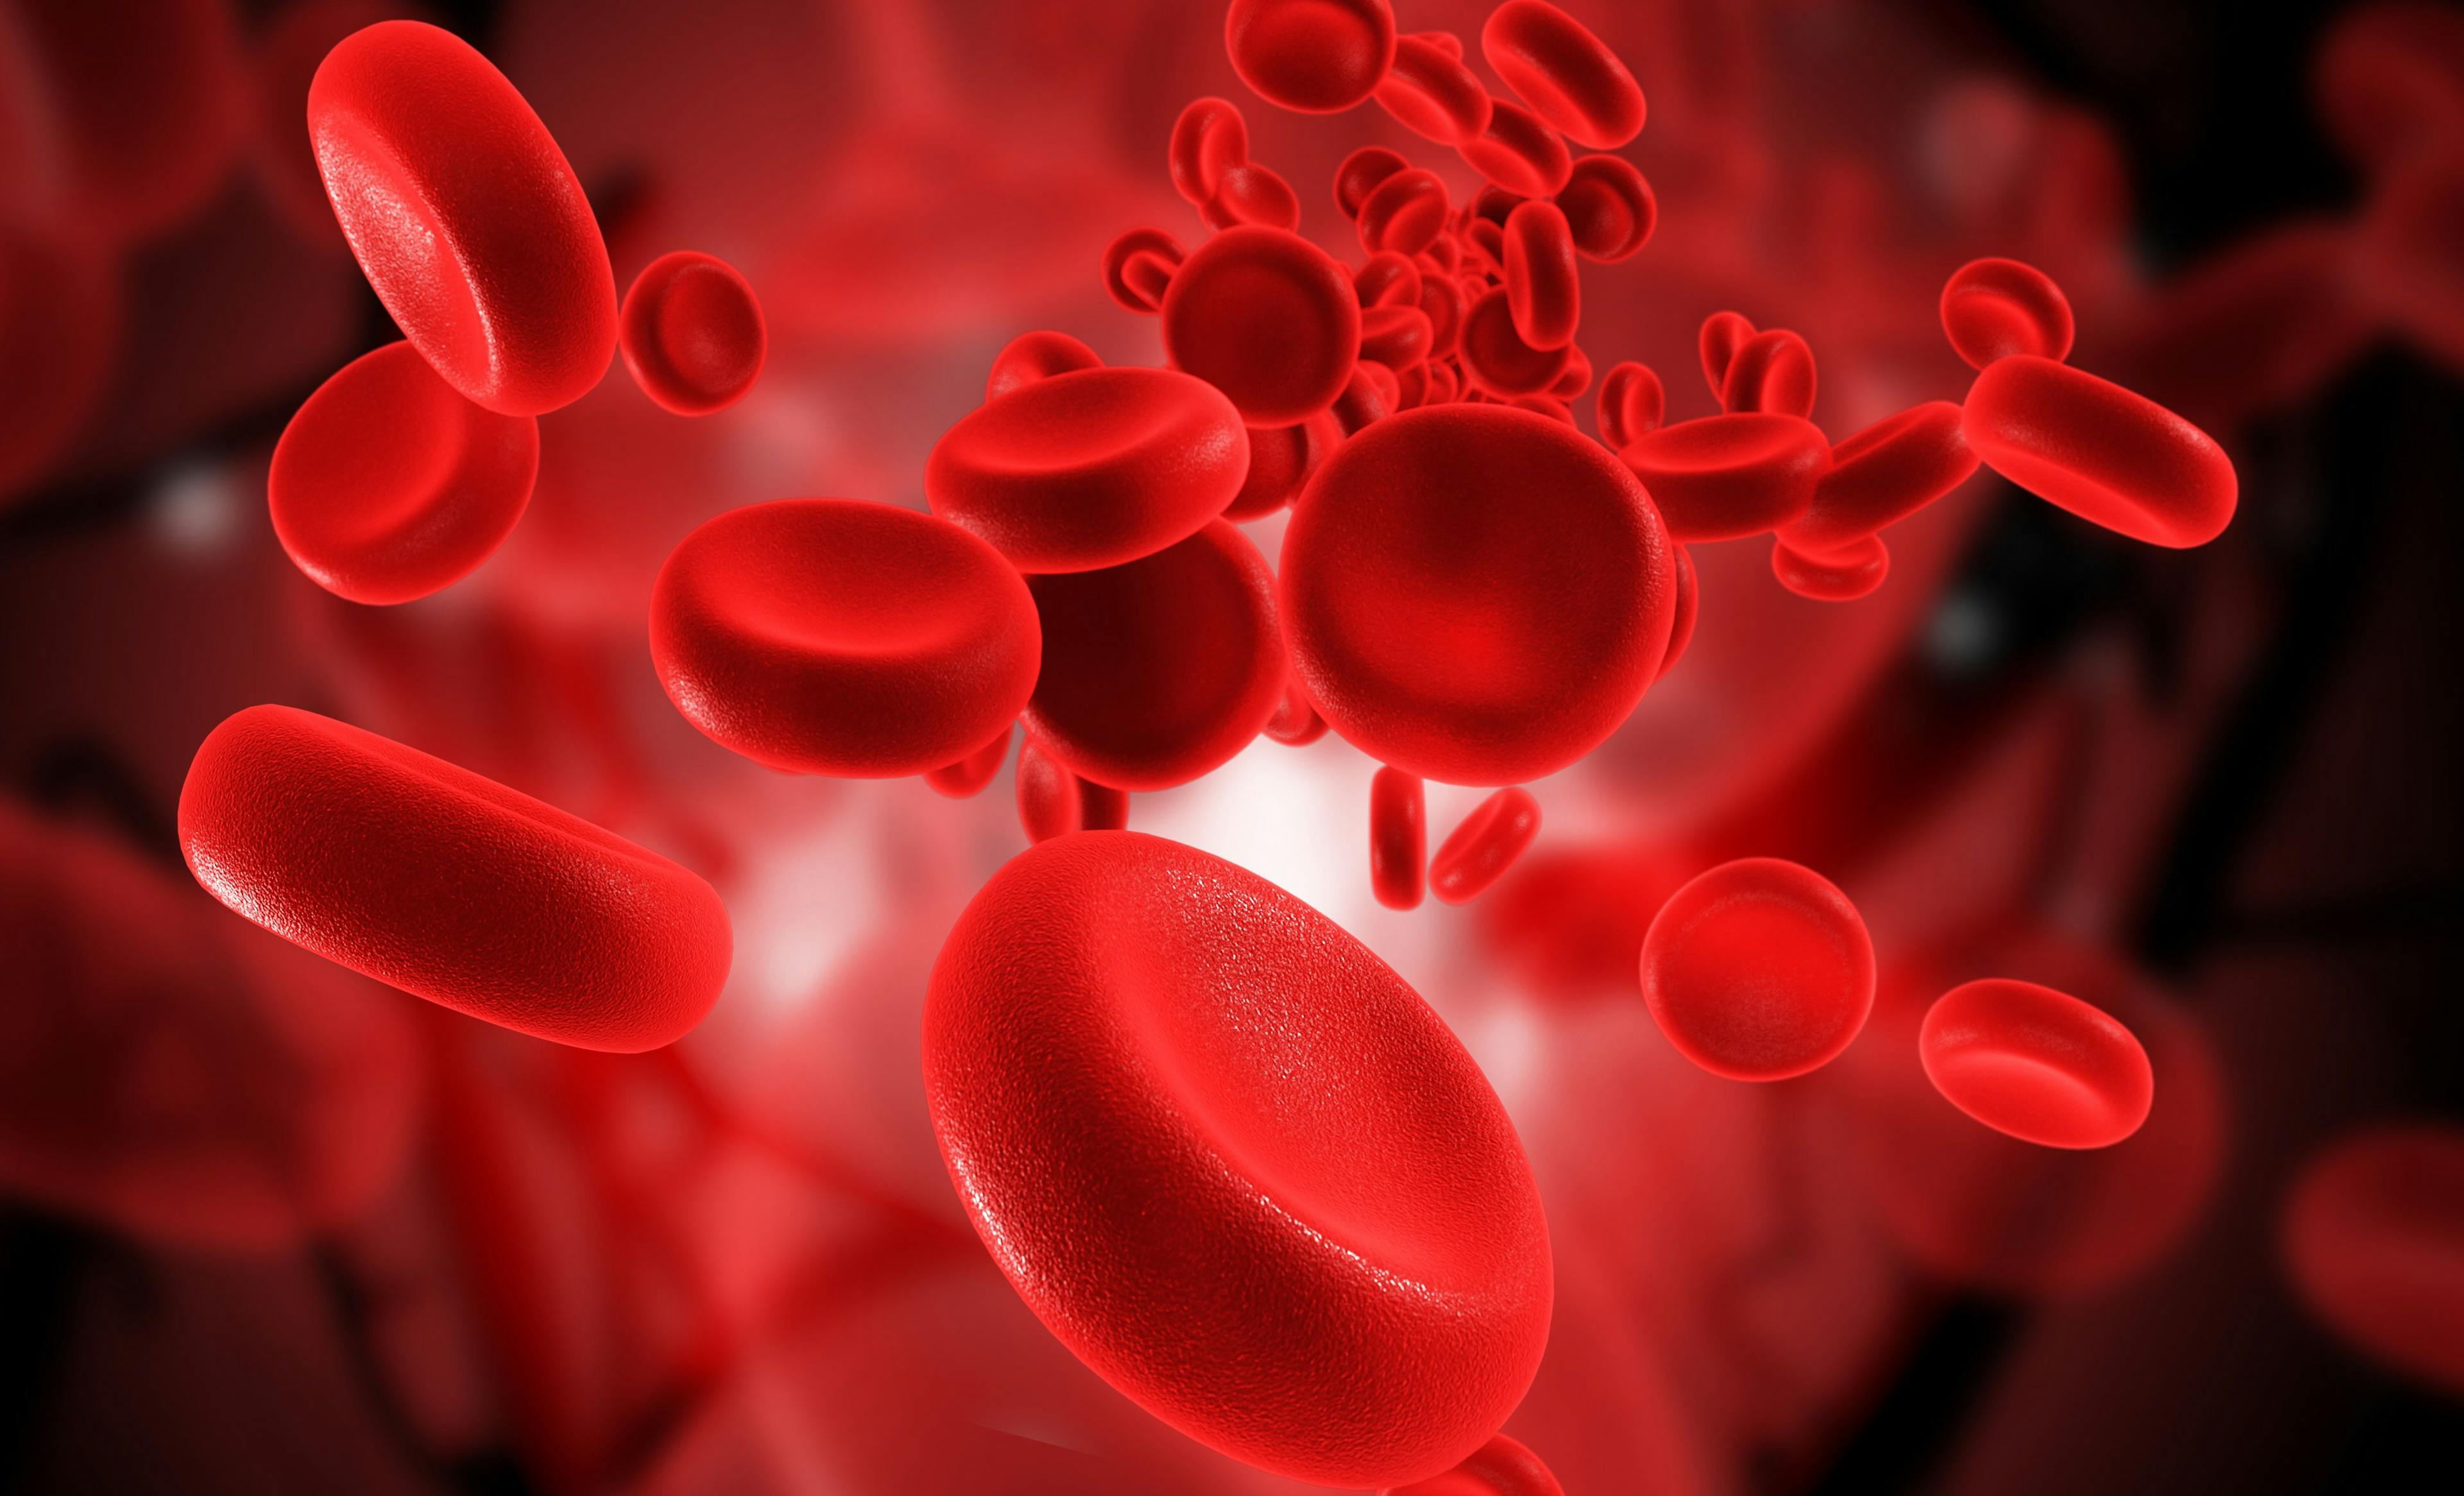 blood cells| Image Credit: © abhijith3747 - www.stock.adobe.com